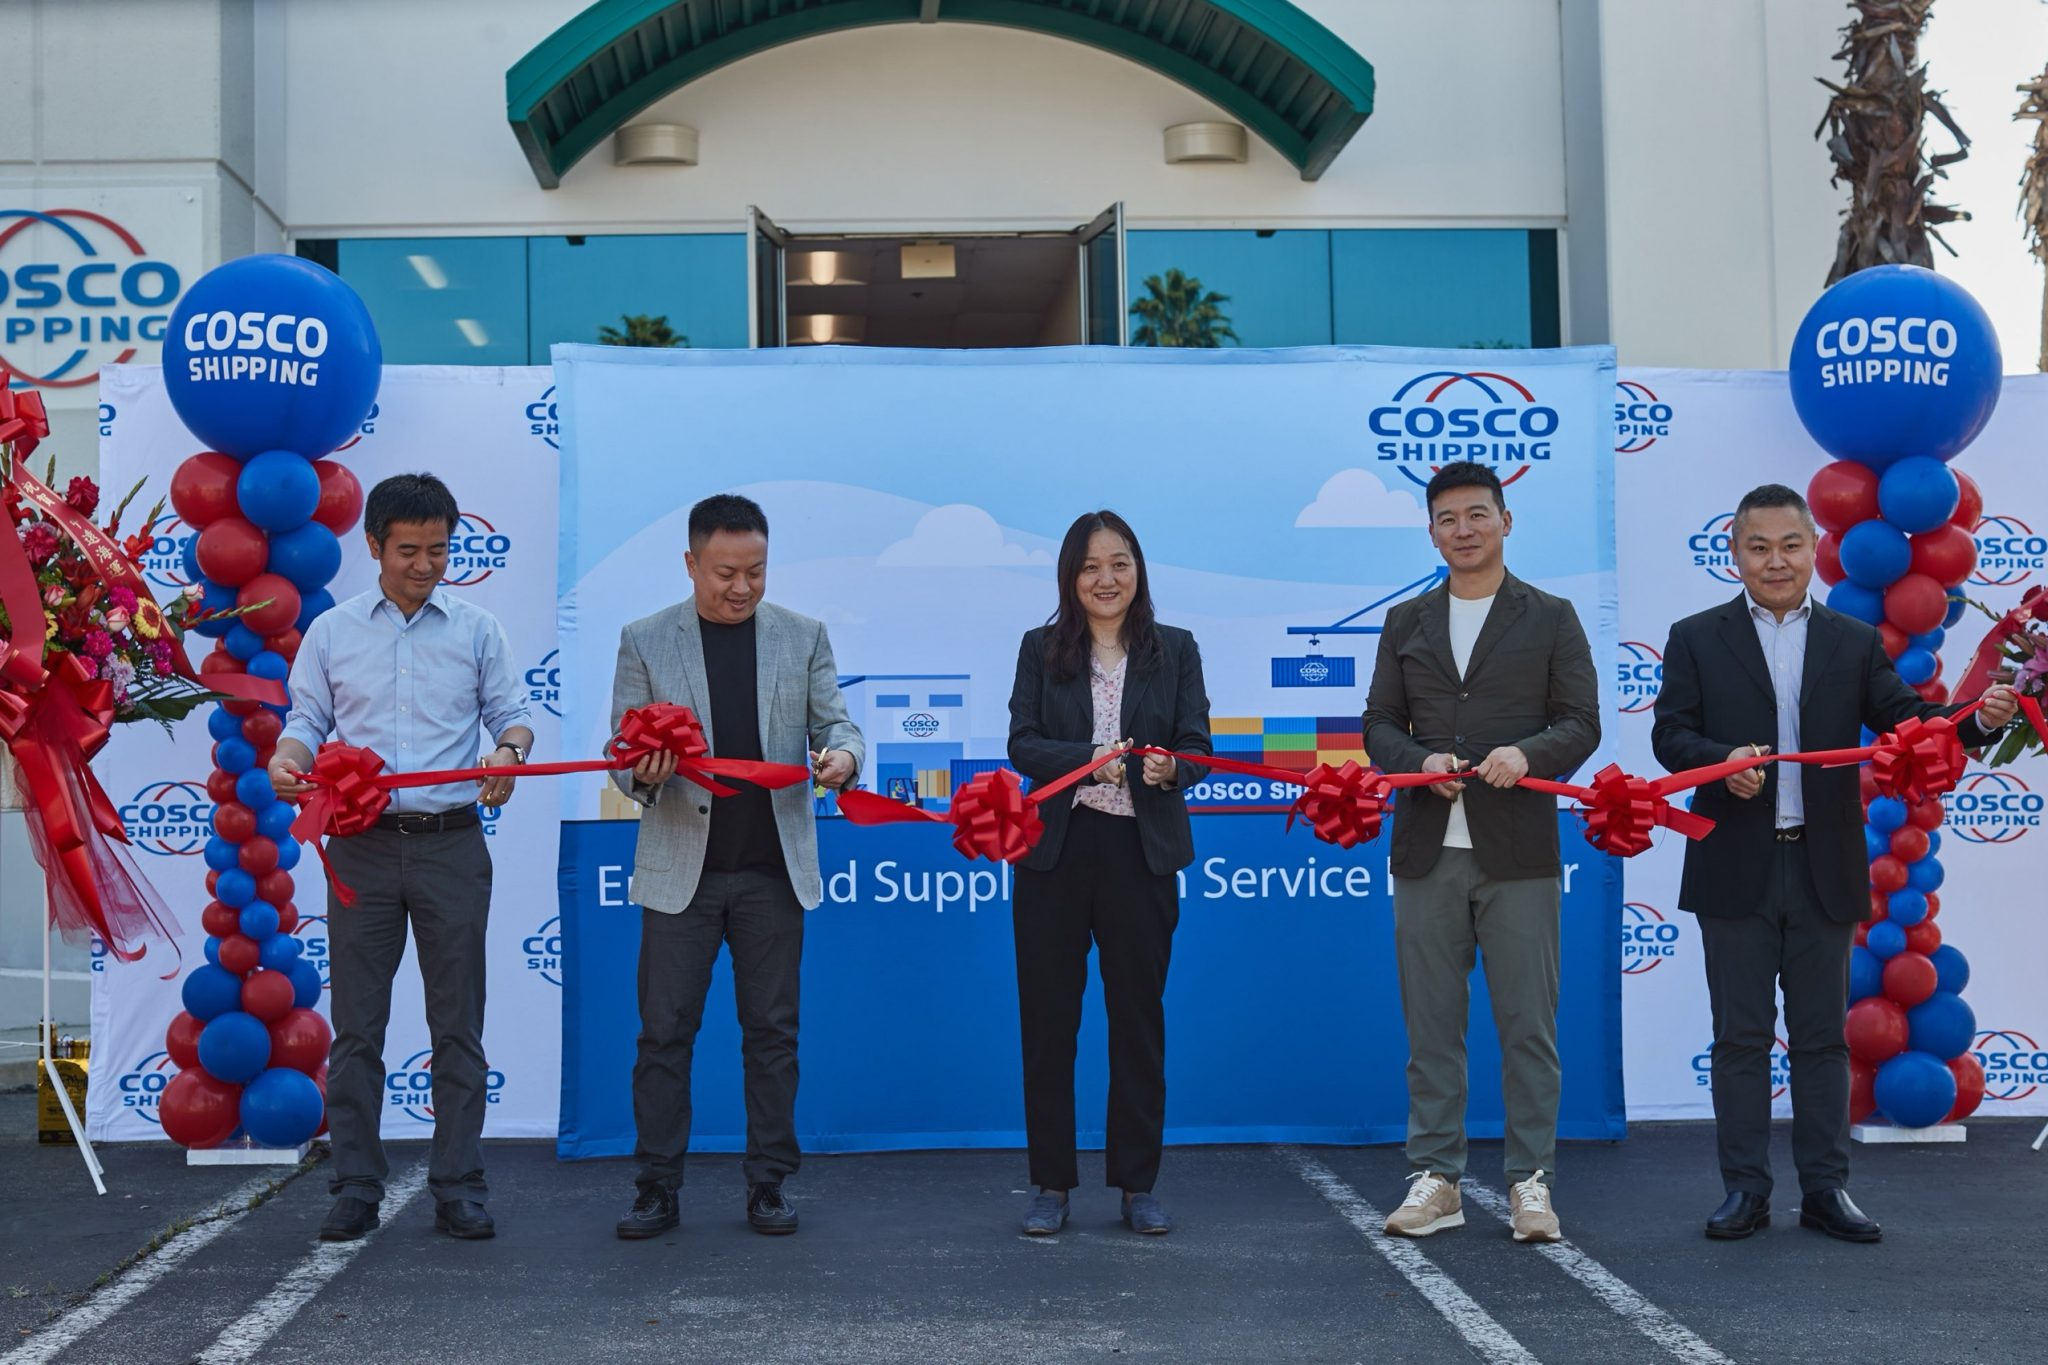 COSCO SHIPPING Launches Its Self-Operated Warehouse in the U.S. 
Enhancing e-Commerce Fulfillment Capabilities